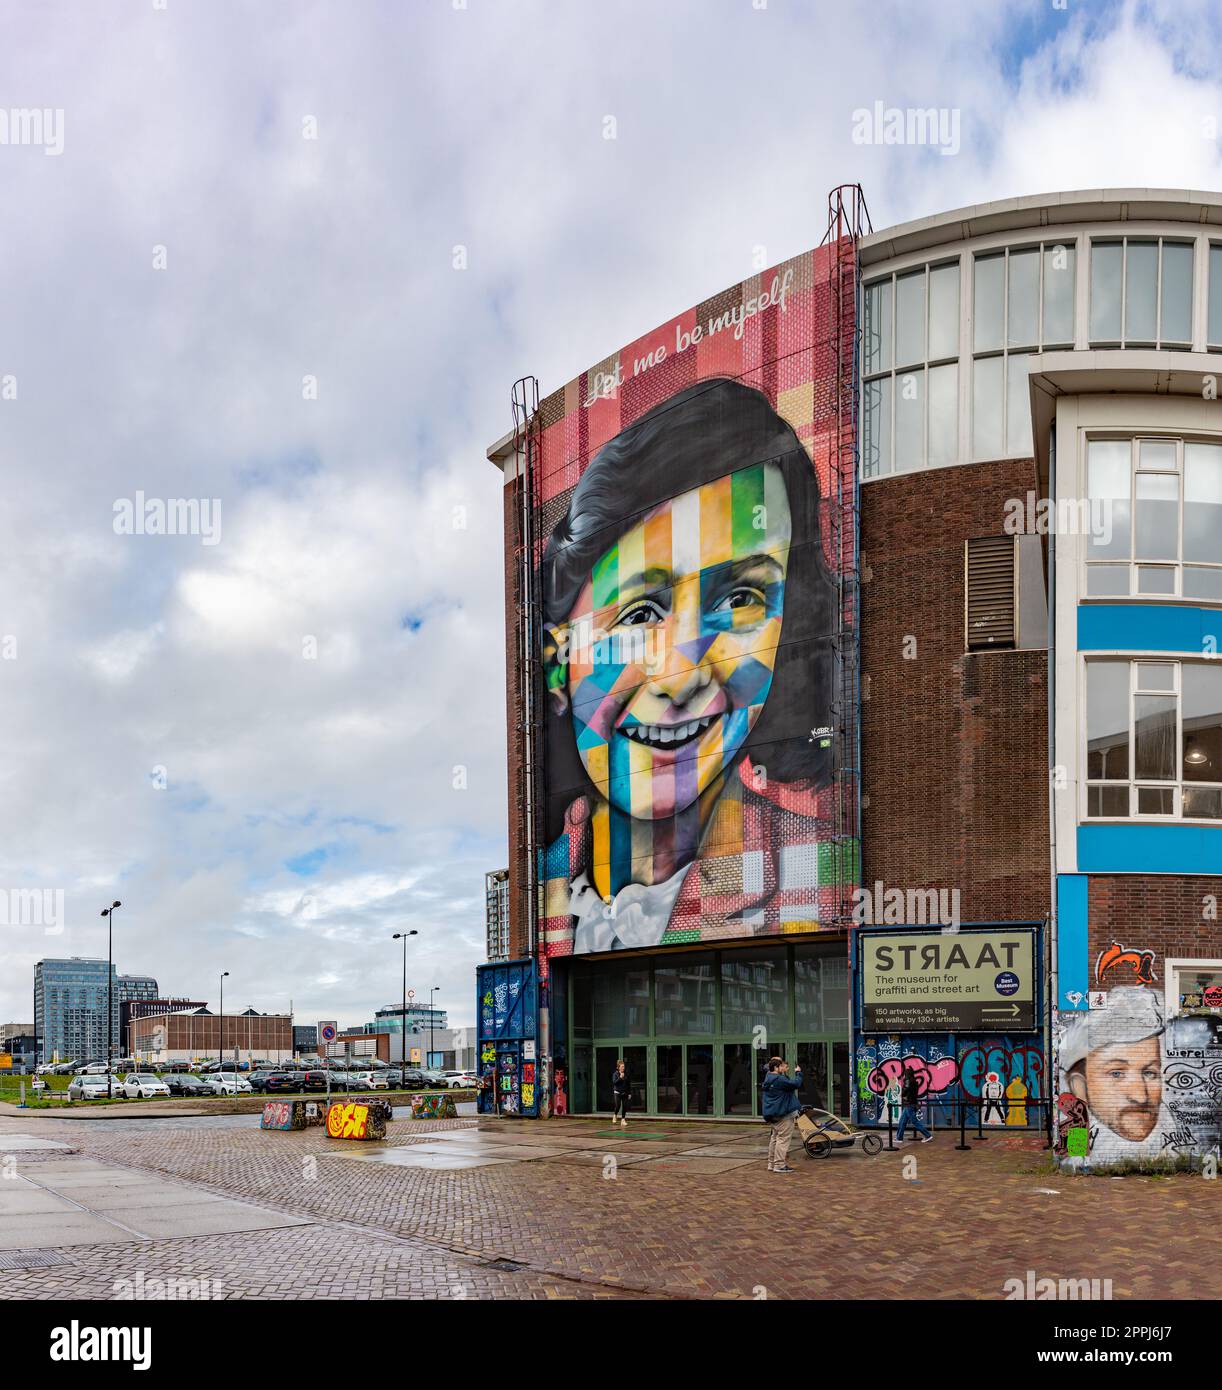 Anne Frank Mural - Let Me Be Myself Stock Photo